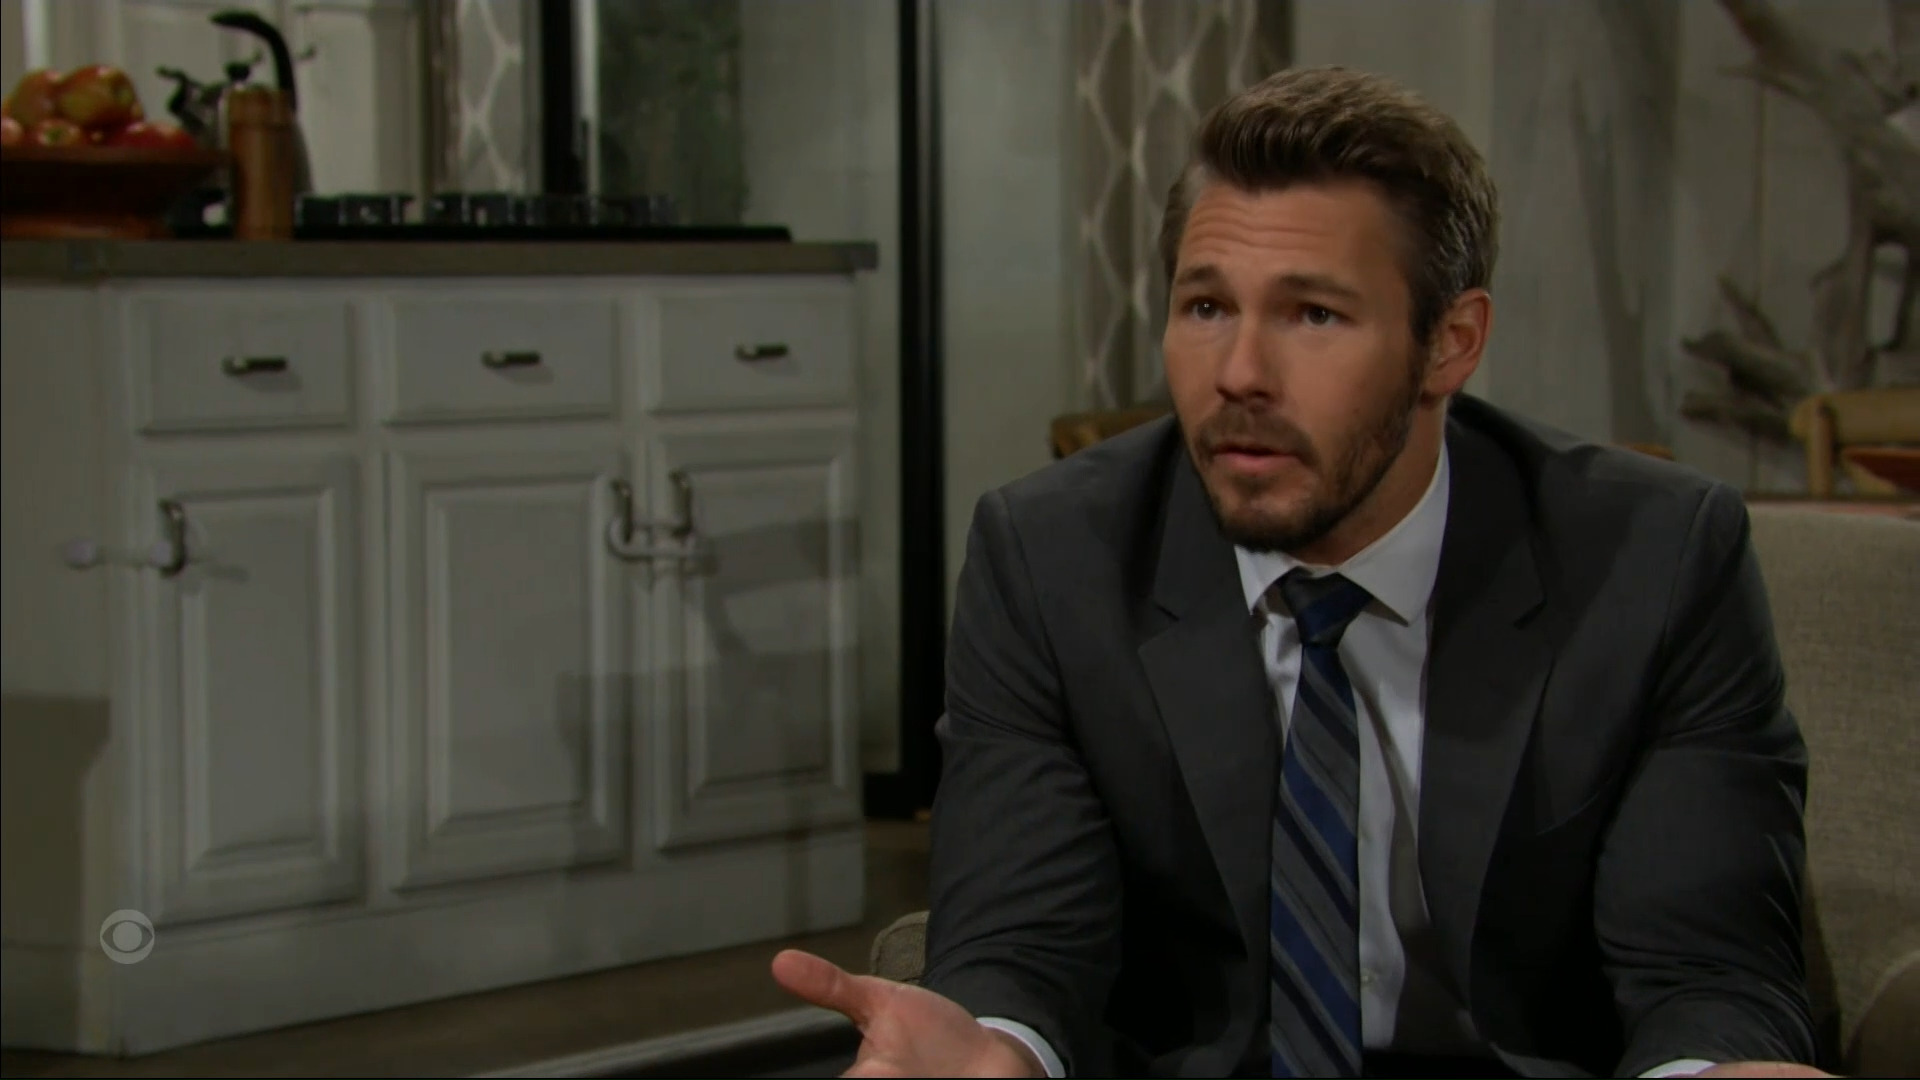 liam tells steffy she needed to know